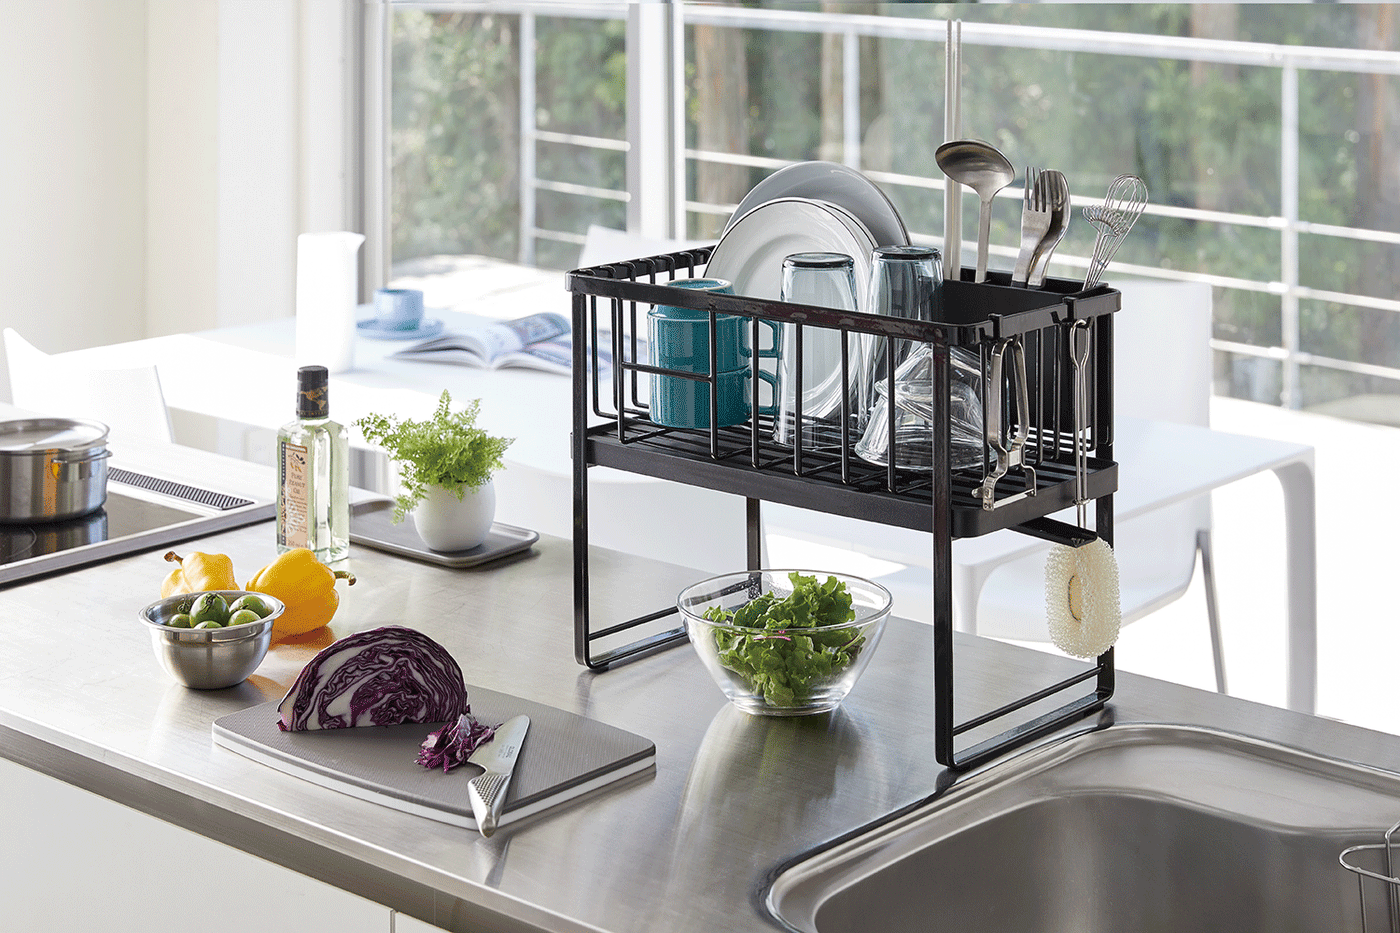 26/33 2 Tier Dish Drying Rack Over Sink Rack Drainer Shelf Kitchen  Cutlery Holder Stainless Steel Over The Sink Shelf Storage Rack,Silver 